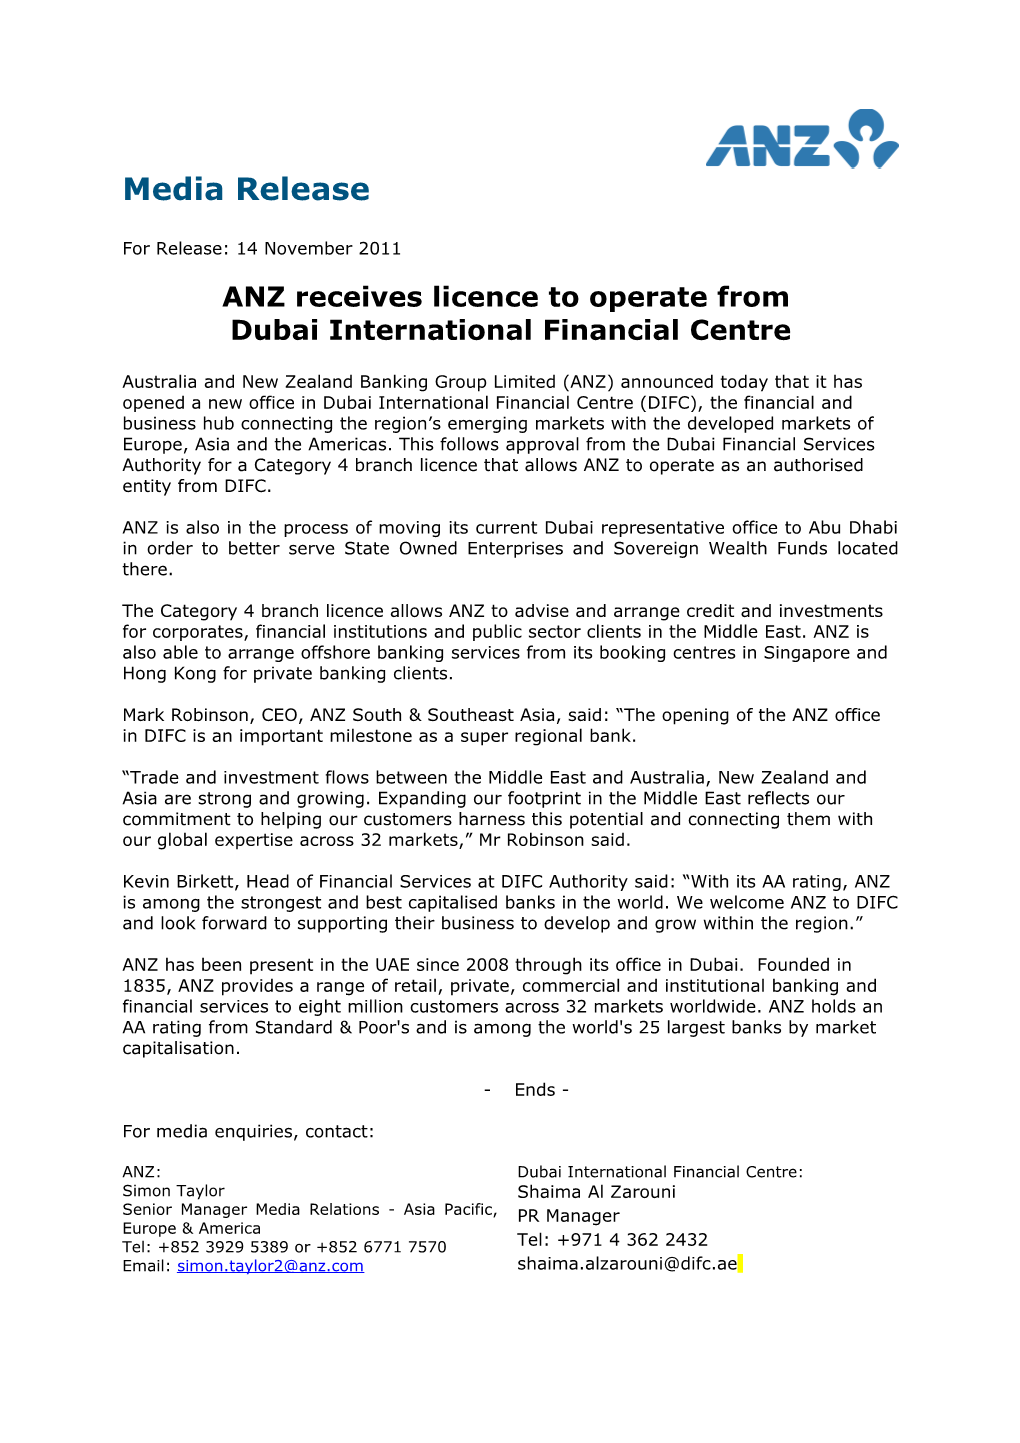 ANZ Receives Licence to Operate From